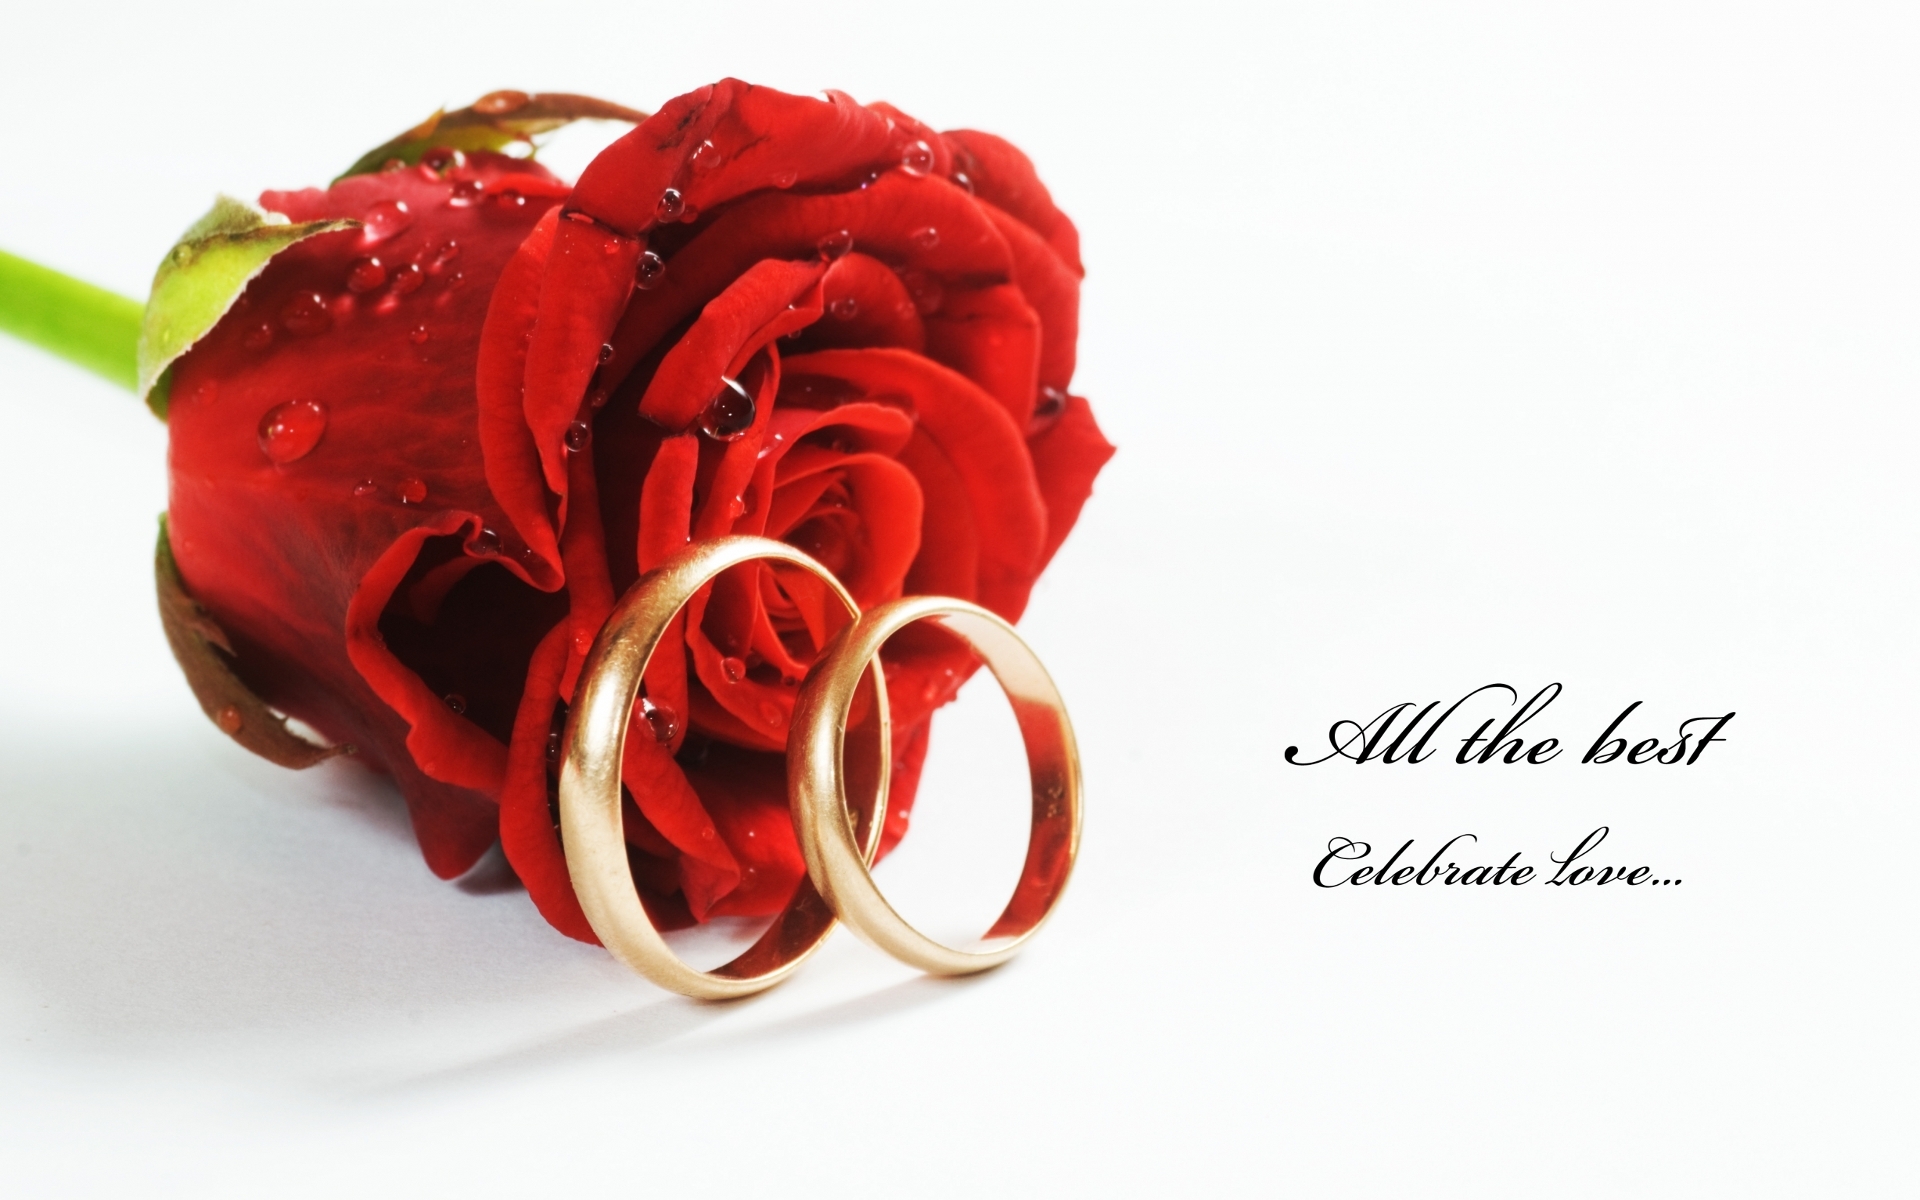 Red Roses Hd Wallpapers - All The Best For The Wedding - HD Wallpaper 